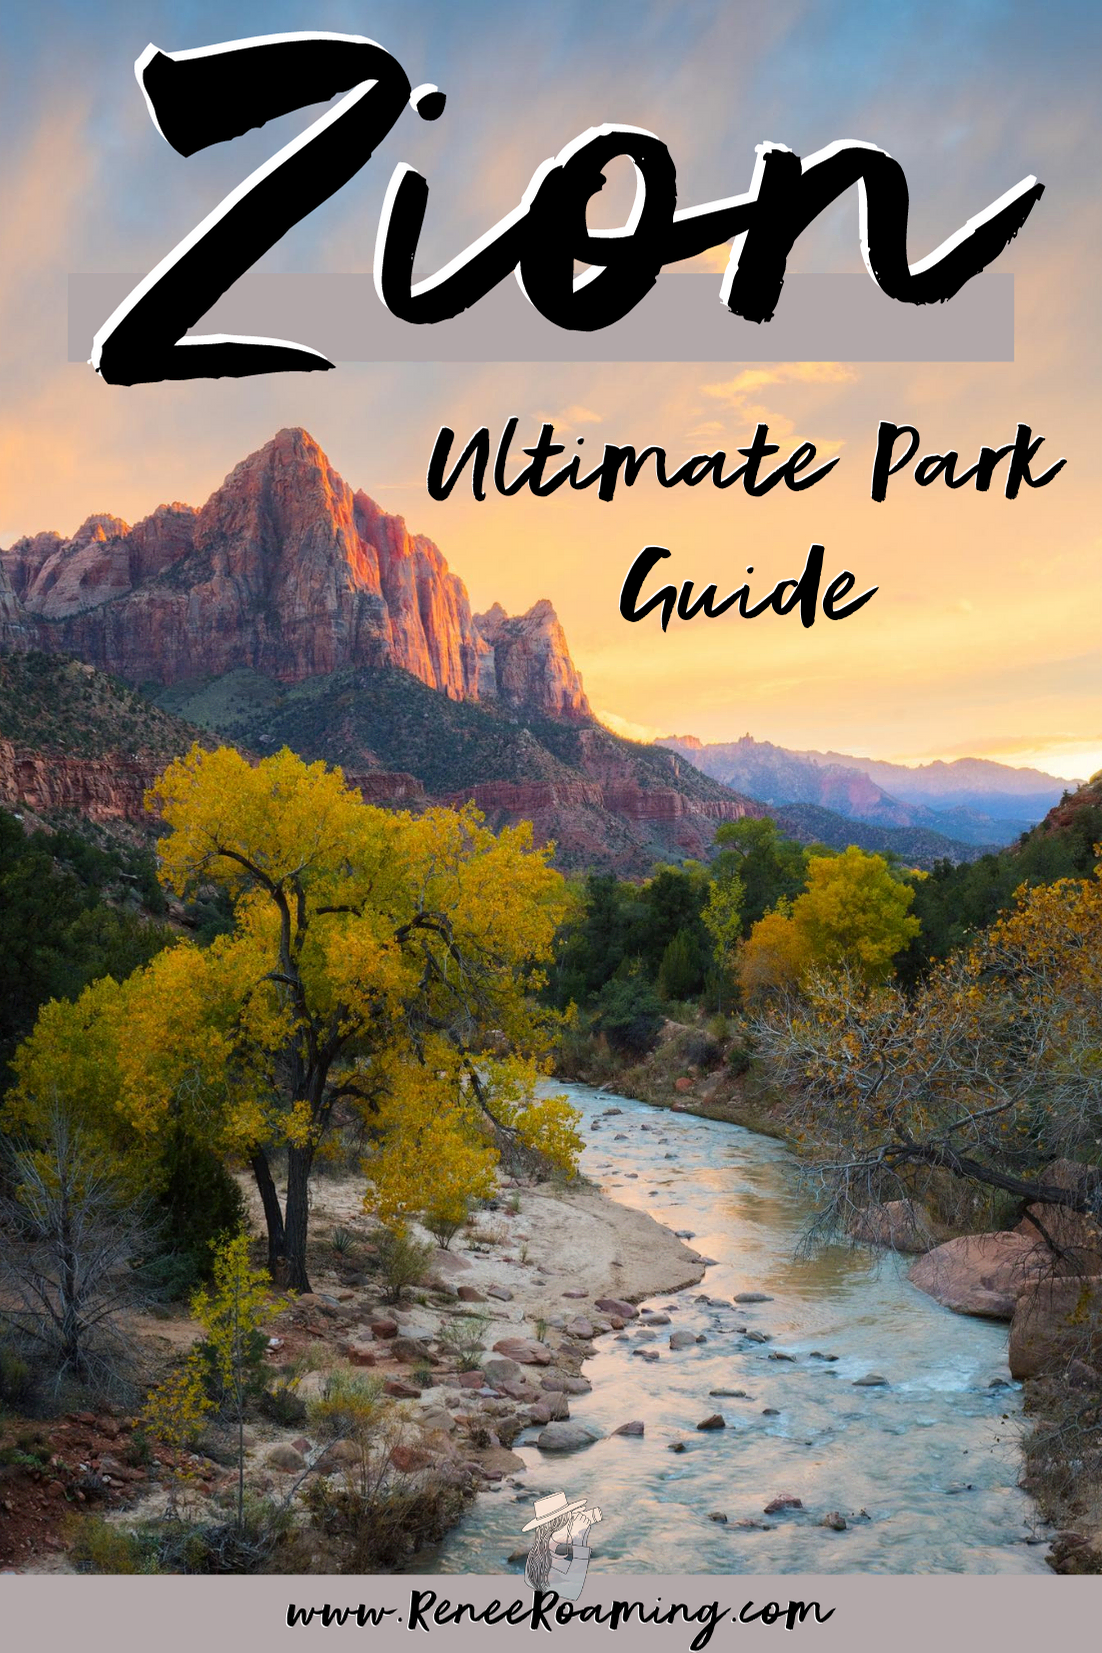 Zion National Park is one of the most unique places on earth, and one that truly showcases the diversity of landscapes in the National Parks system. In this guide I will be providing you with information to help you plan your dream Zion National Park trip! You'll find out all the best hikes, the top photo spots, drive up locations, where to stay, a helpful map, and more! #ZionNationalPark #Zion #ZionGuide #ZionHikes #ZionPhotography